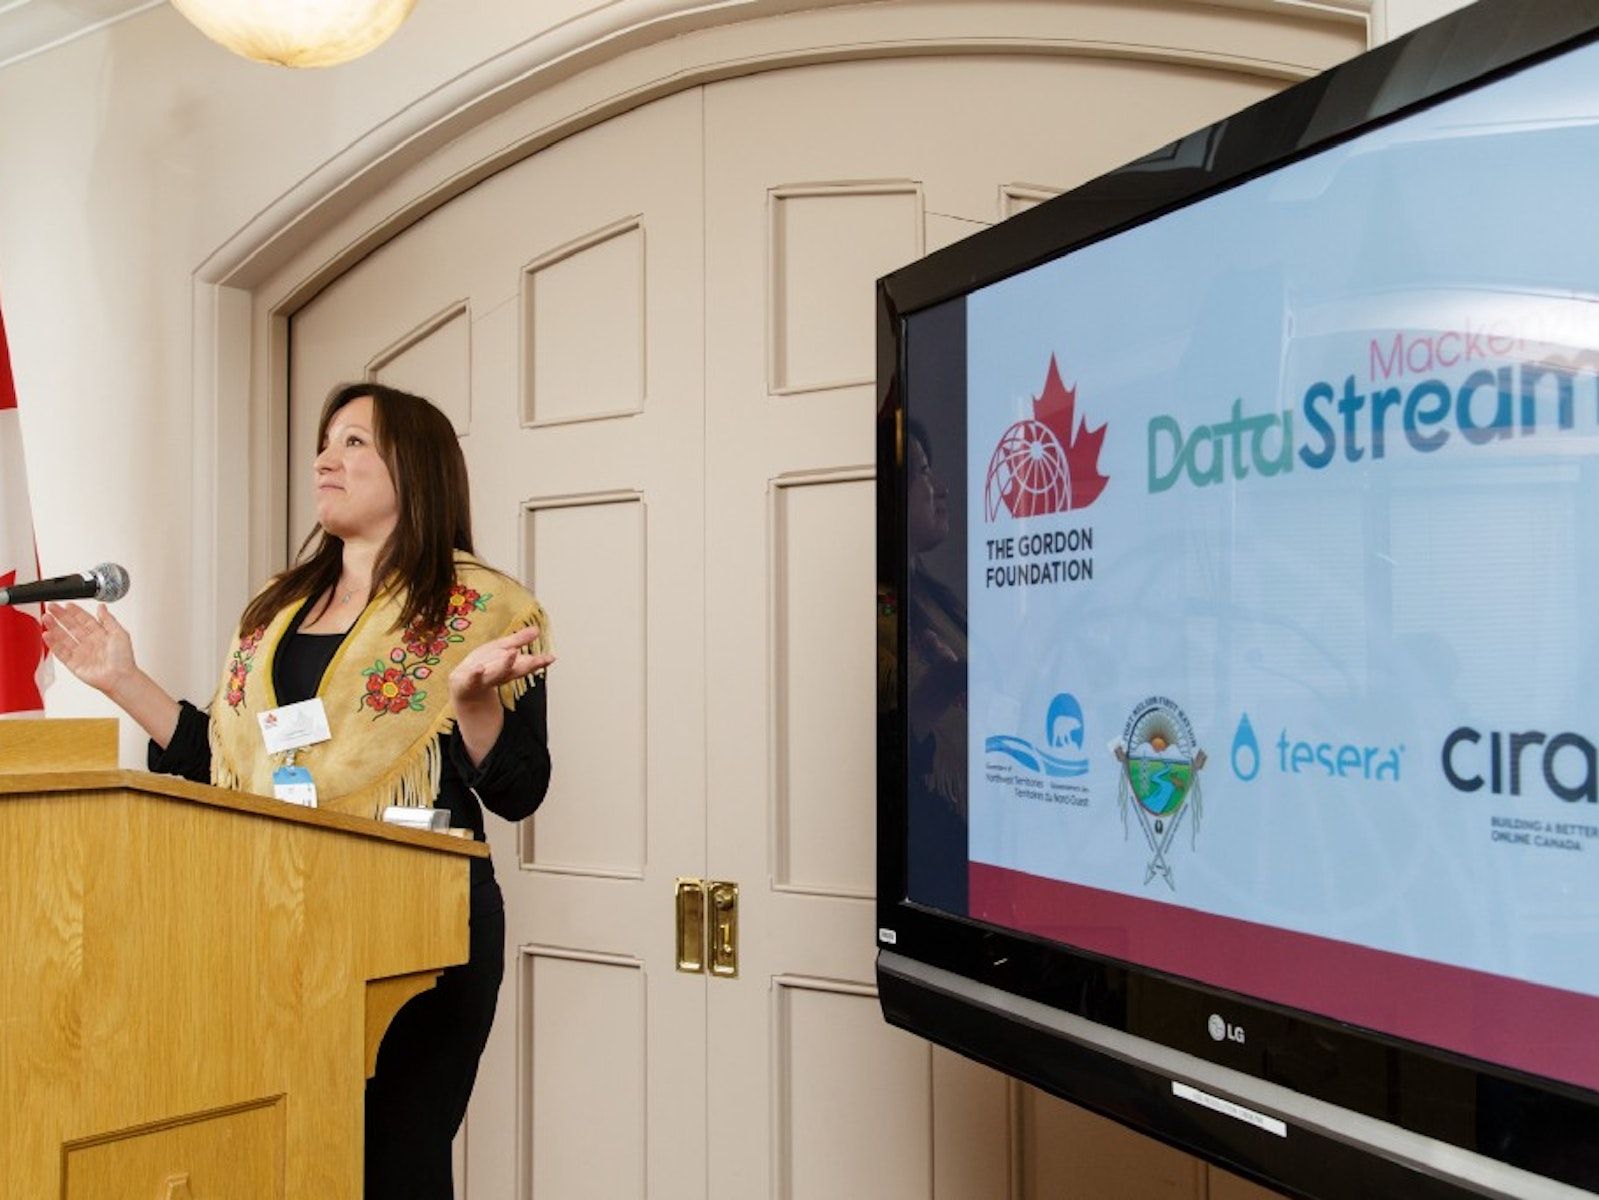 Lana Lowe at a podium next to a screen displaying logos for the gordon foundation, mackenzie datastream, the government of the northwest territories, Fortn Nelson First Nation, Tesera, and CIRA